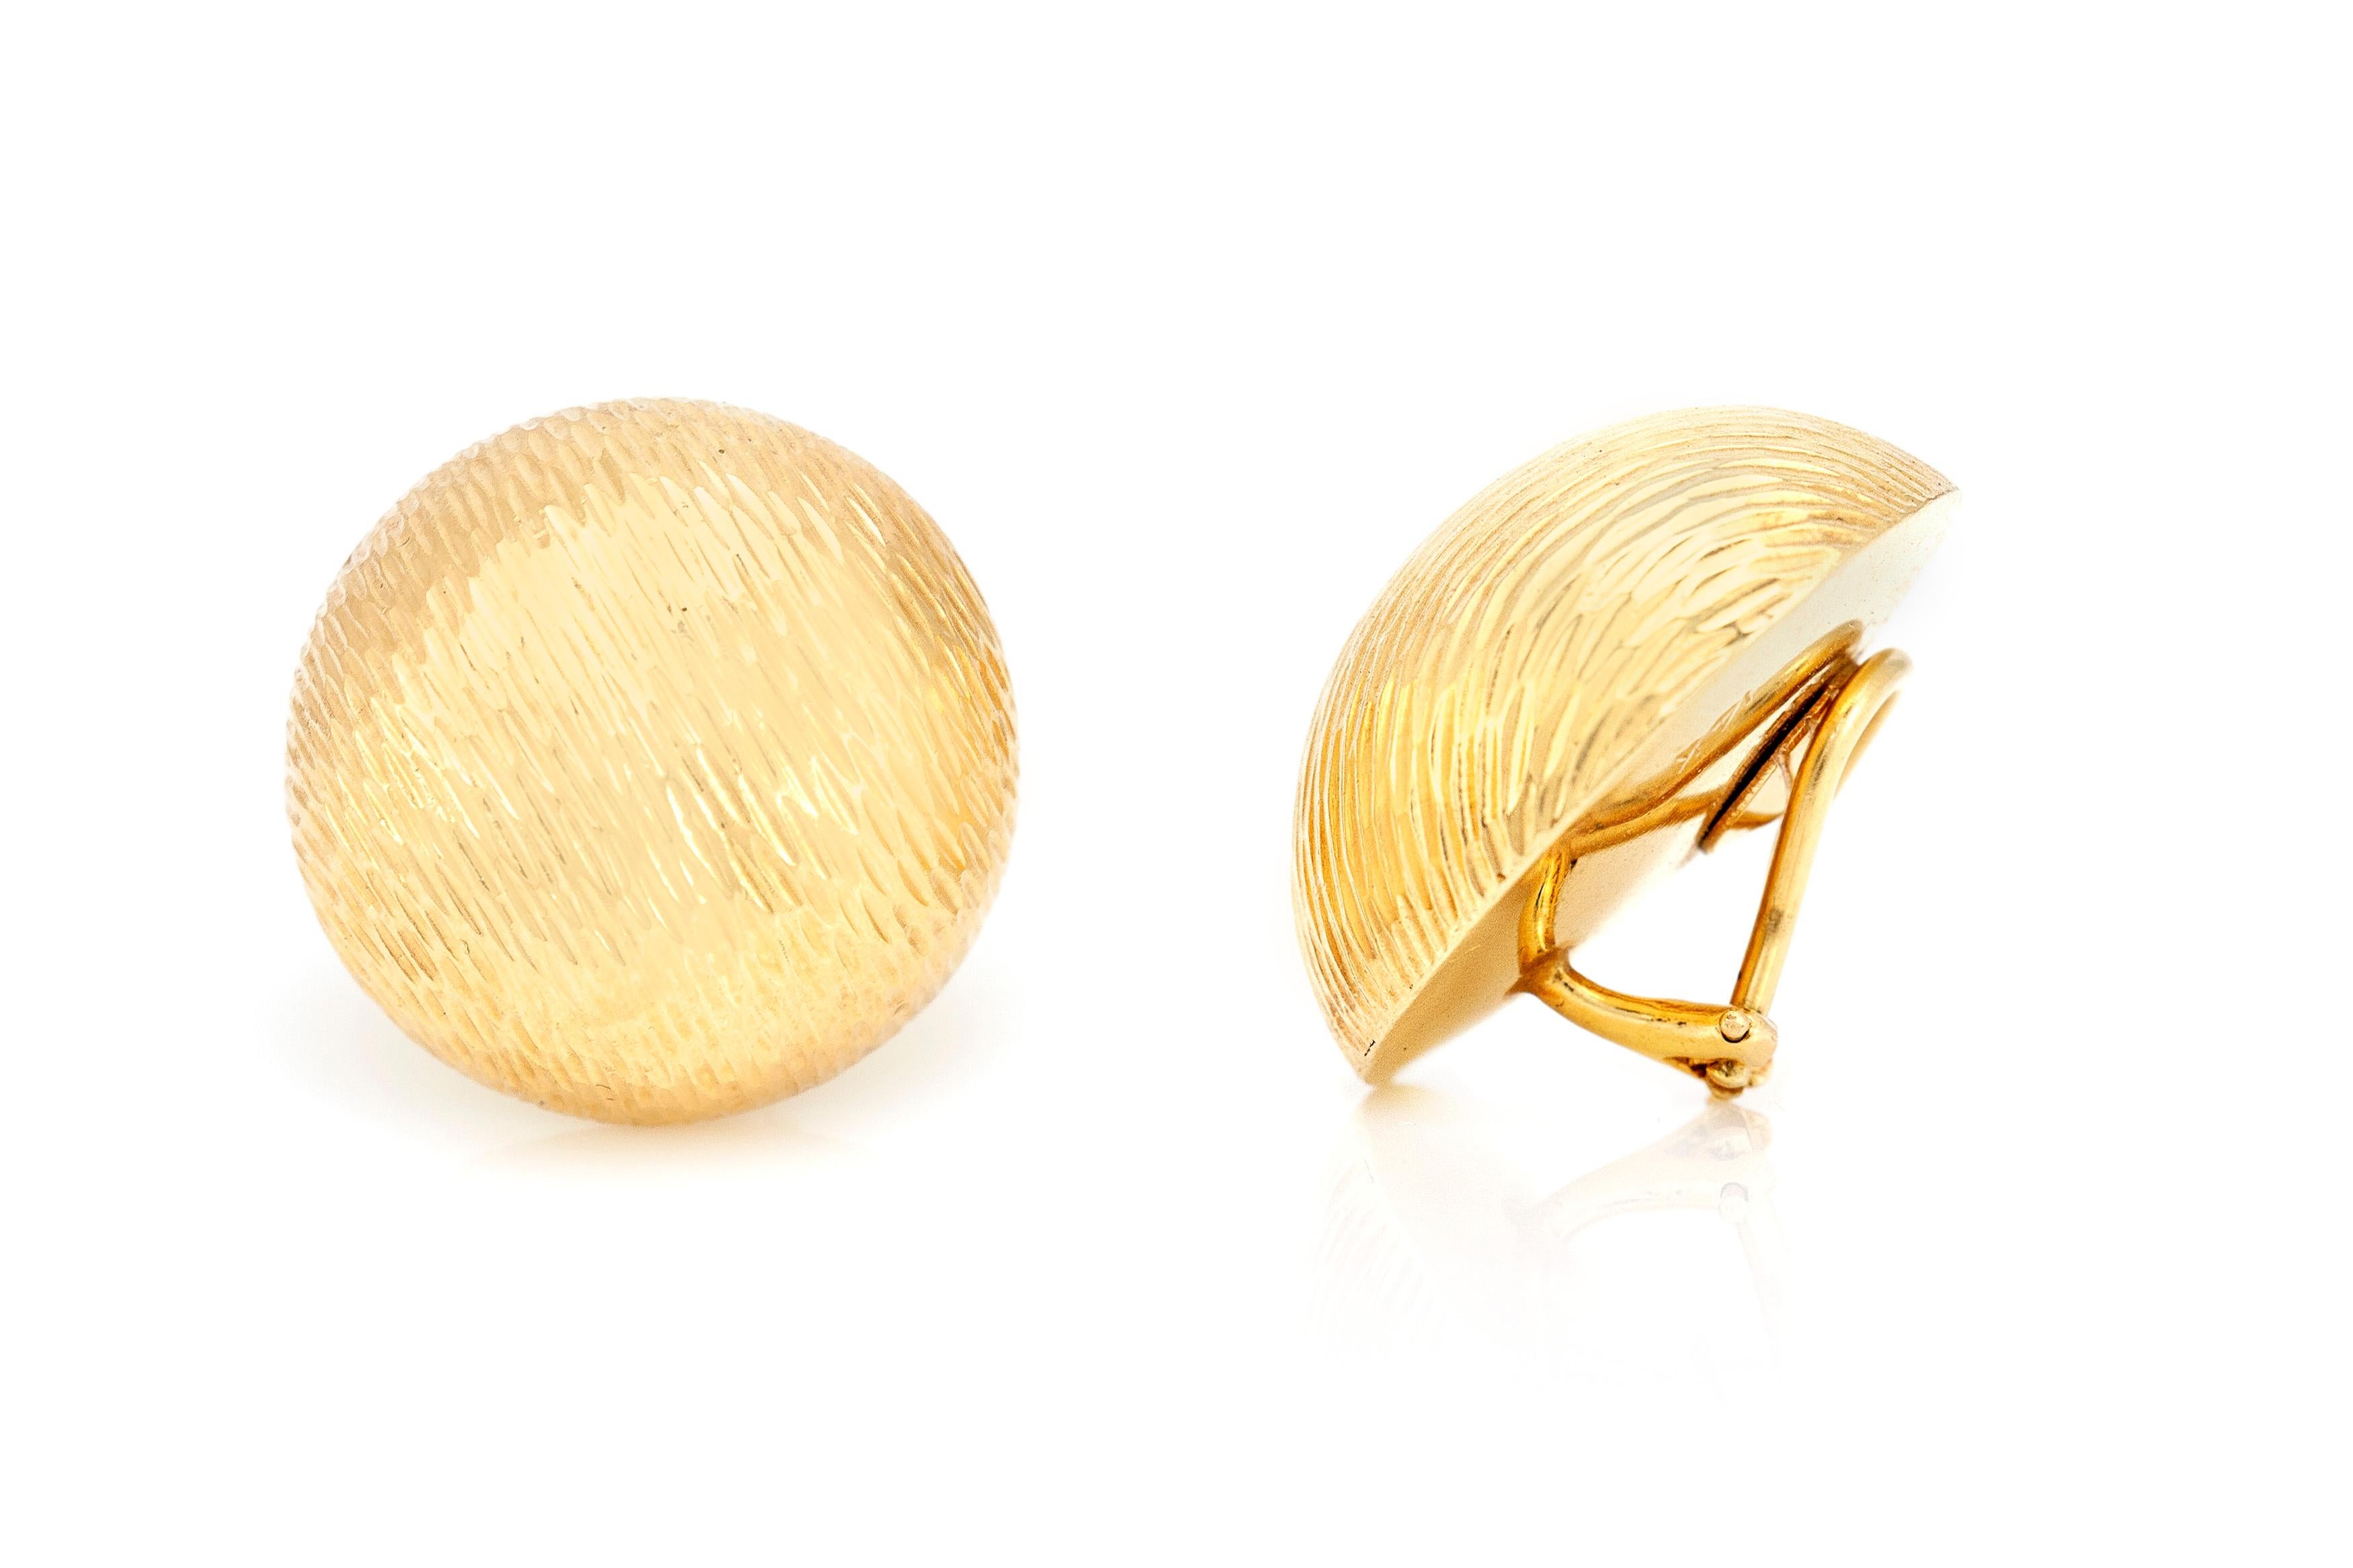 The earrings is finely crafted in 14k yellow gold and weighing approximately total of 16.2 dwt.
1.40 inches each earr.